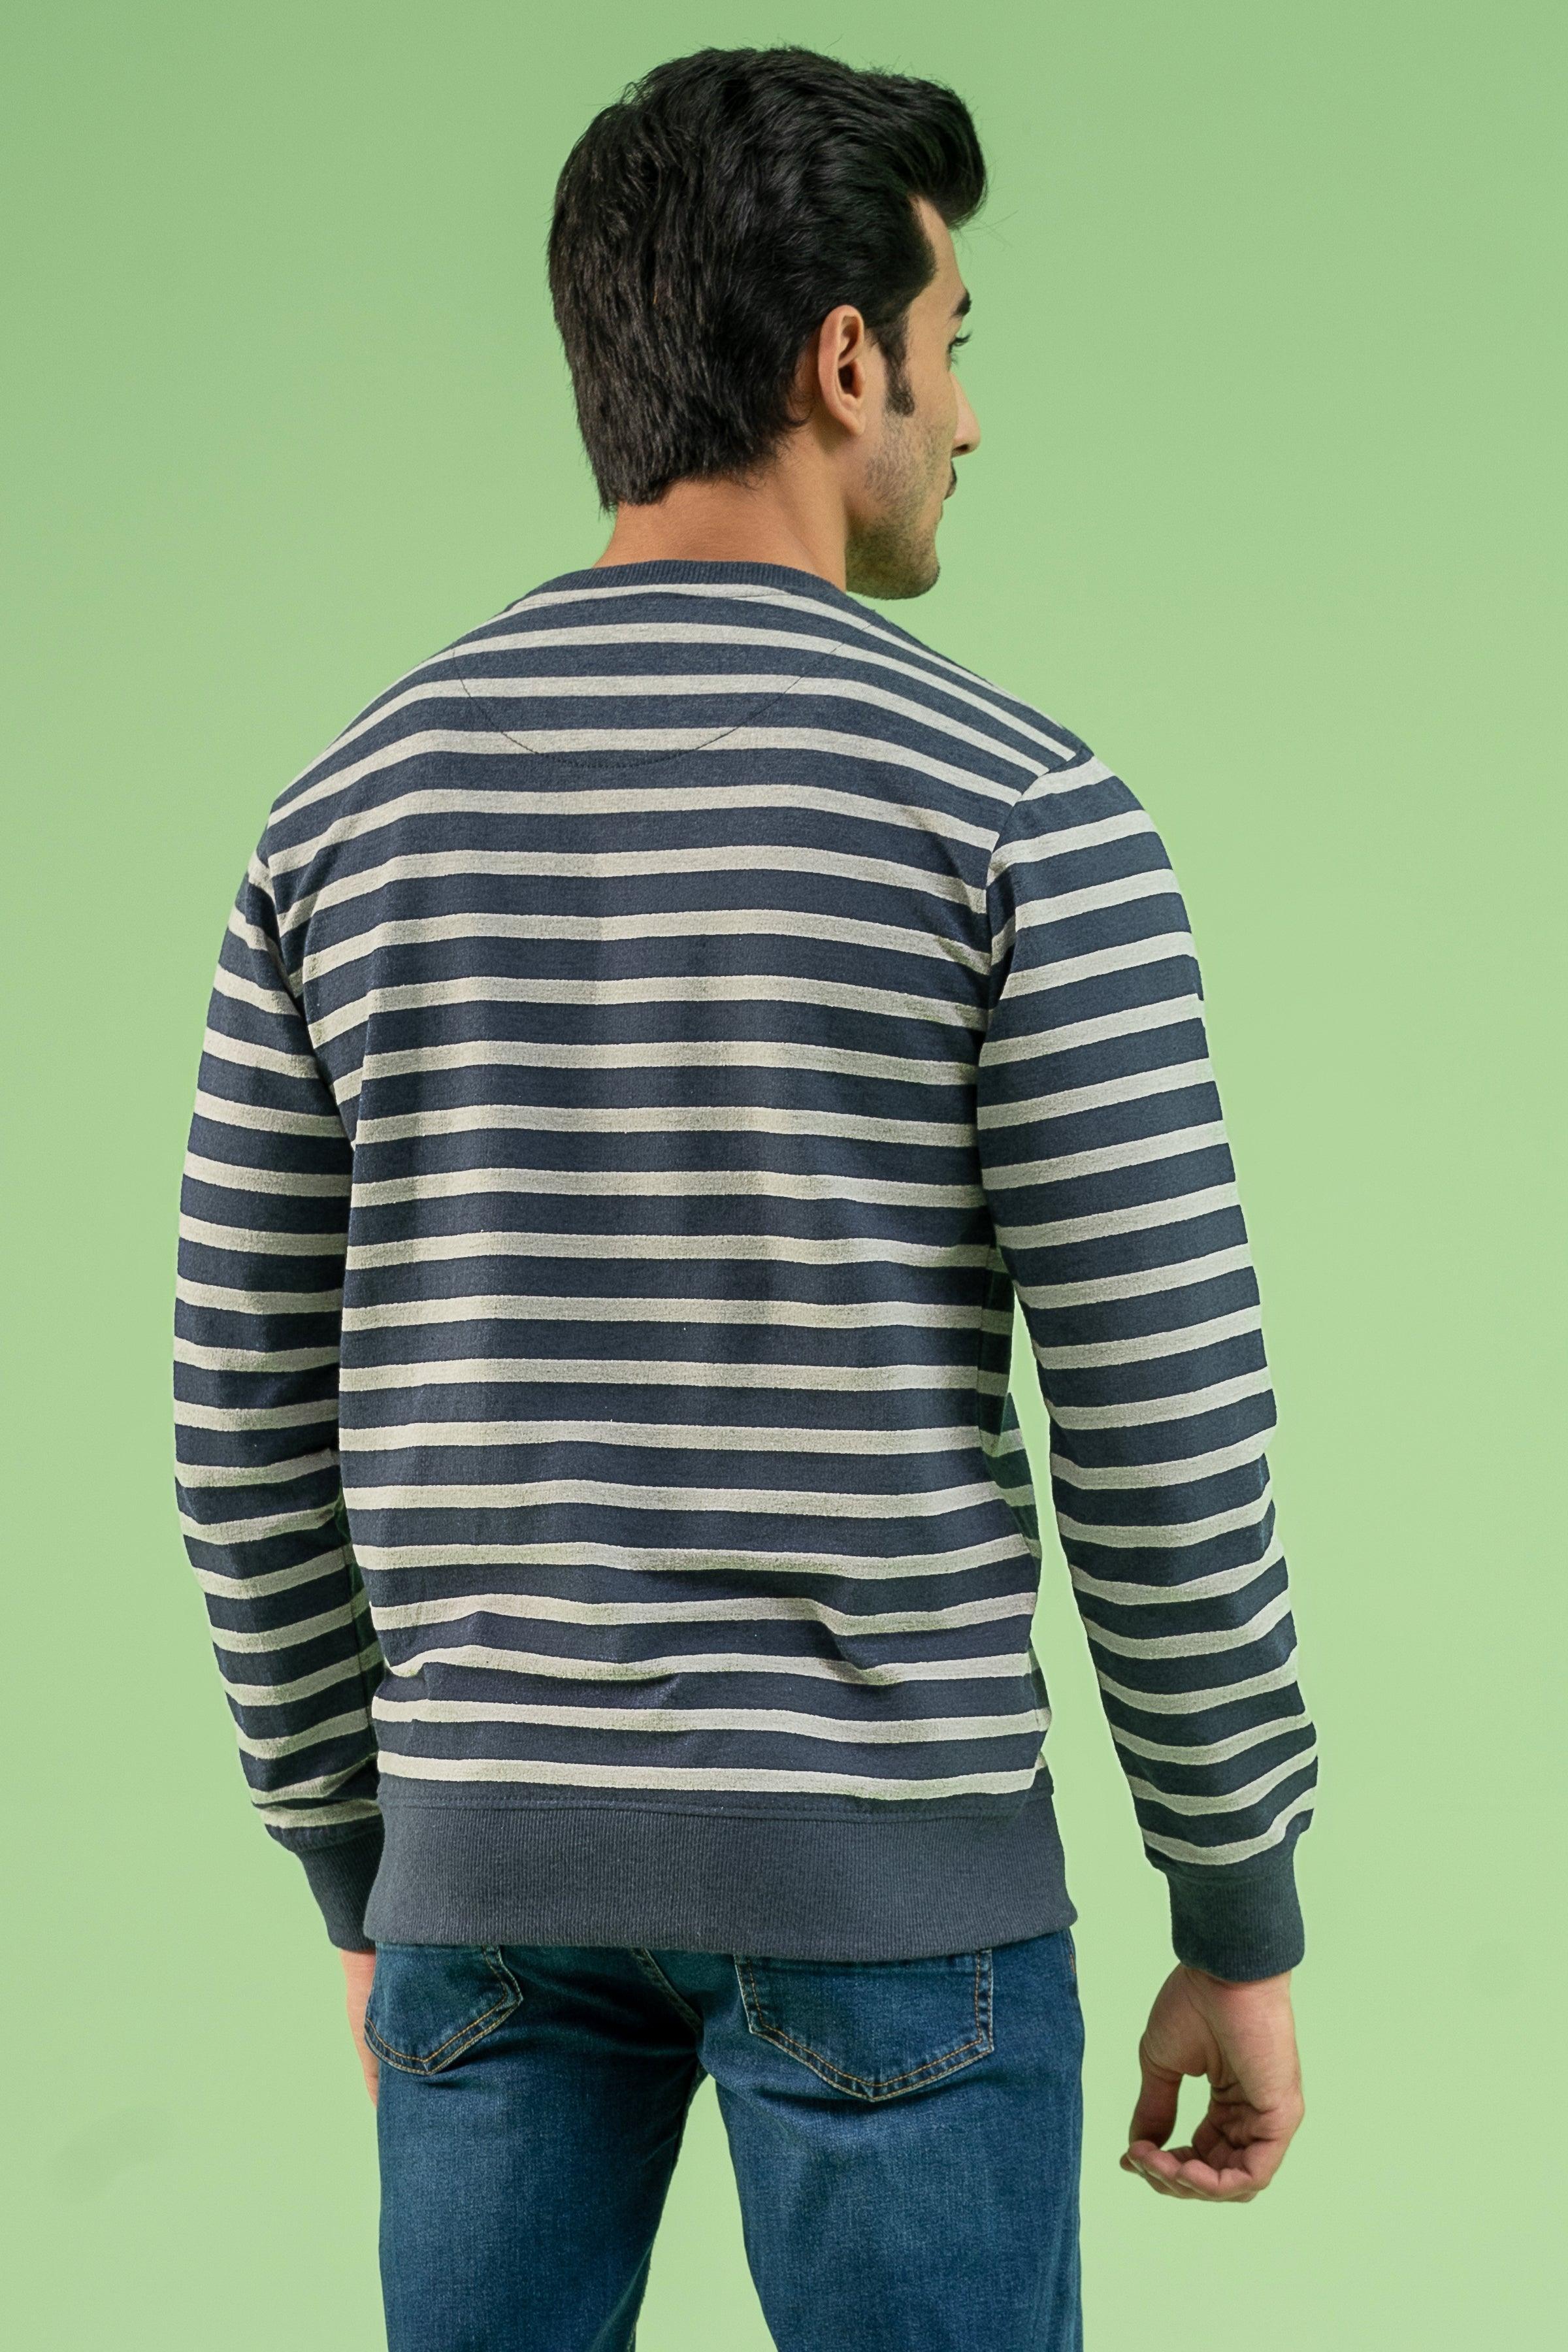 YARN DYED TERRY SWEAT SHIRT NAVY GREY at Charcoal Clothing